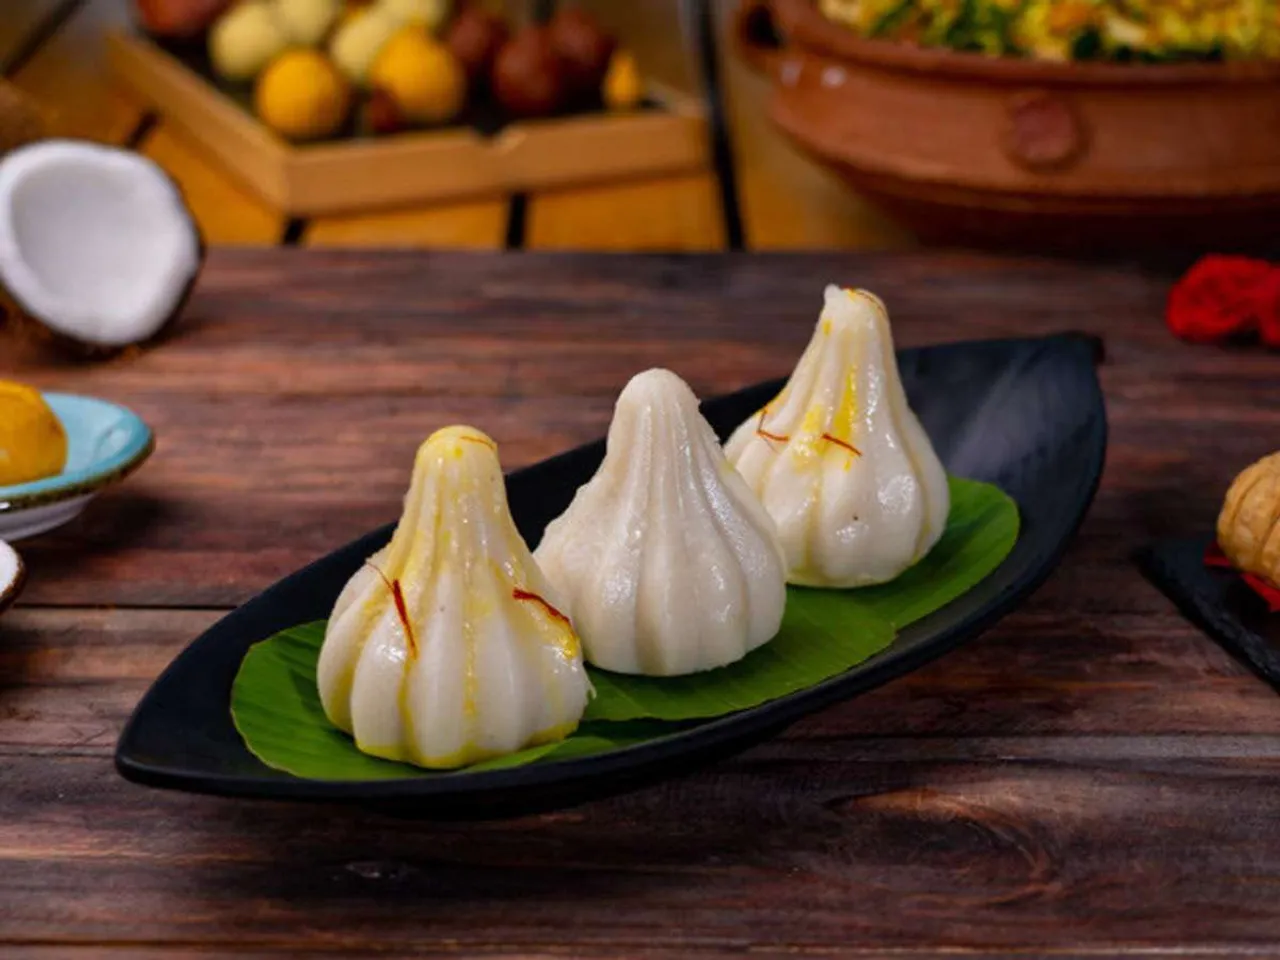 7 places to check out to get your dose of modaks in Mumbai